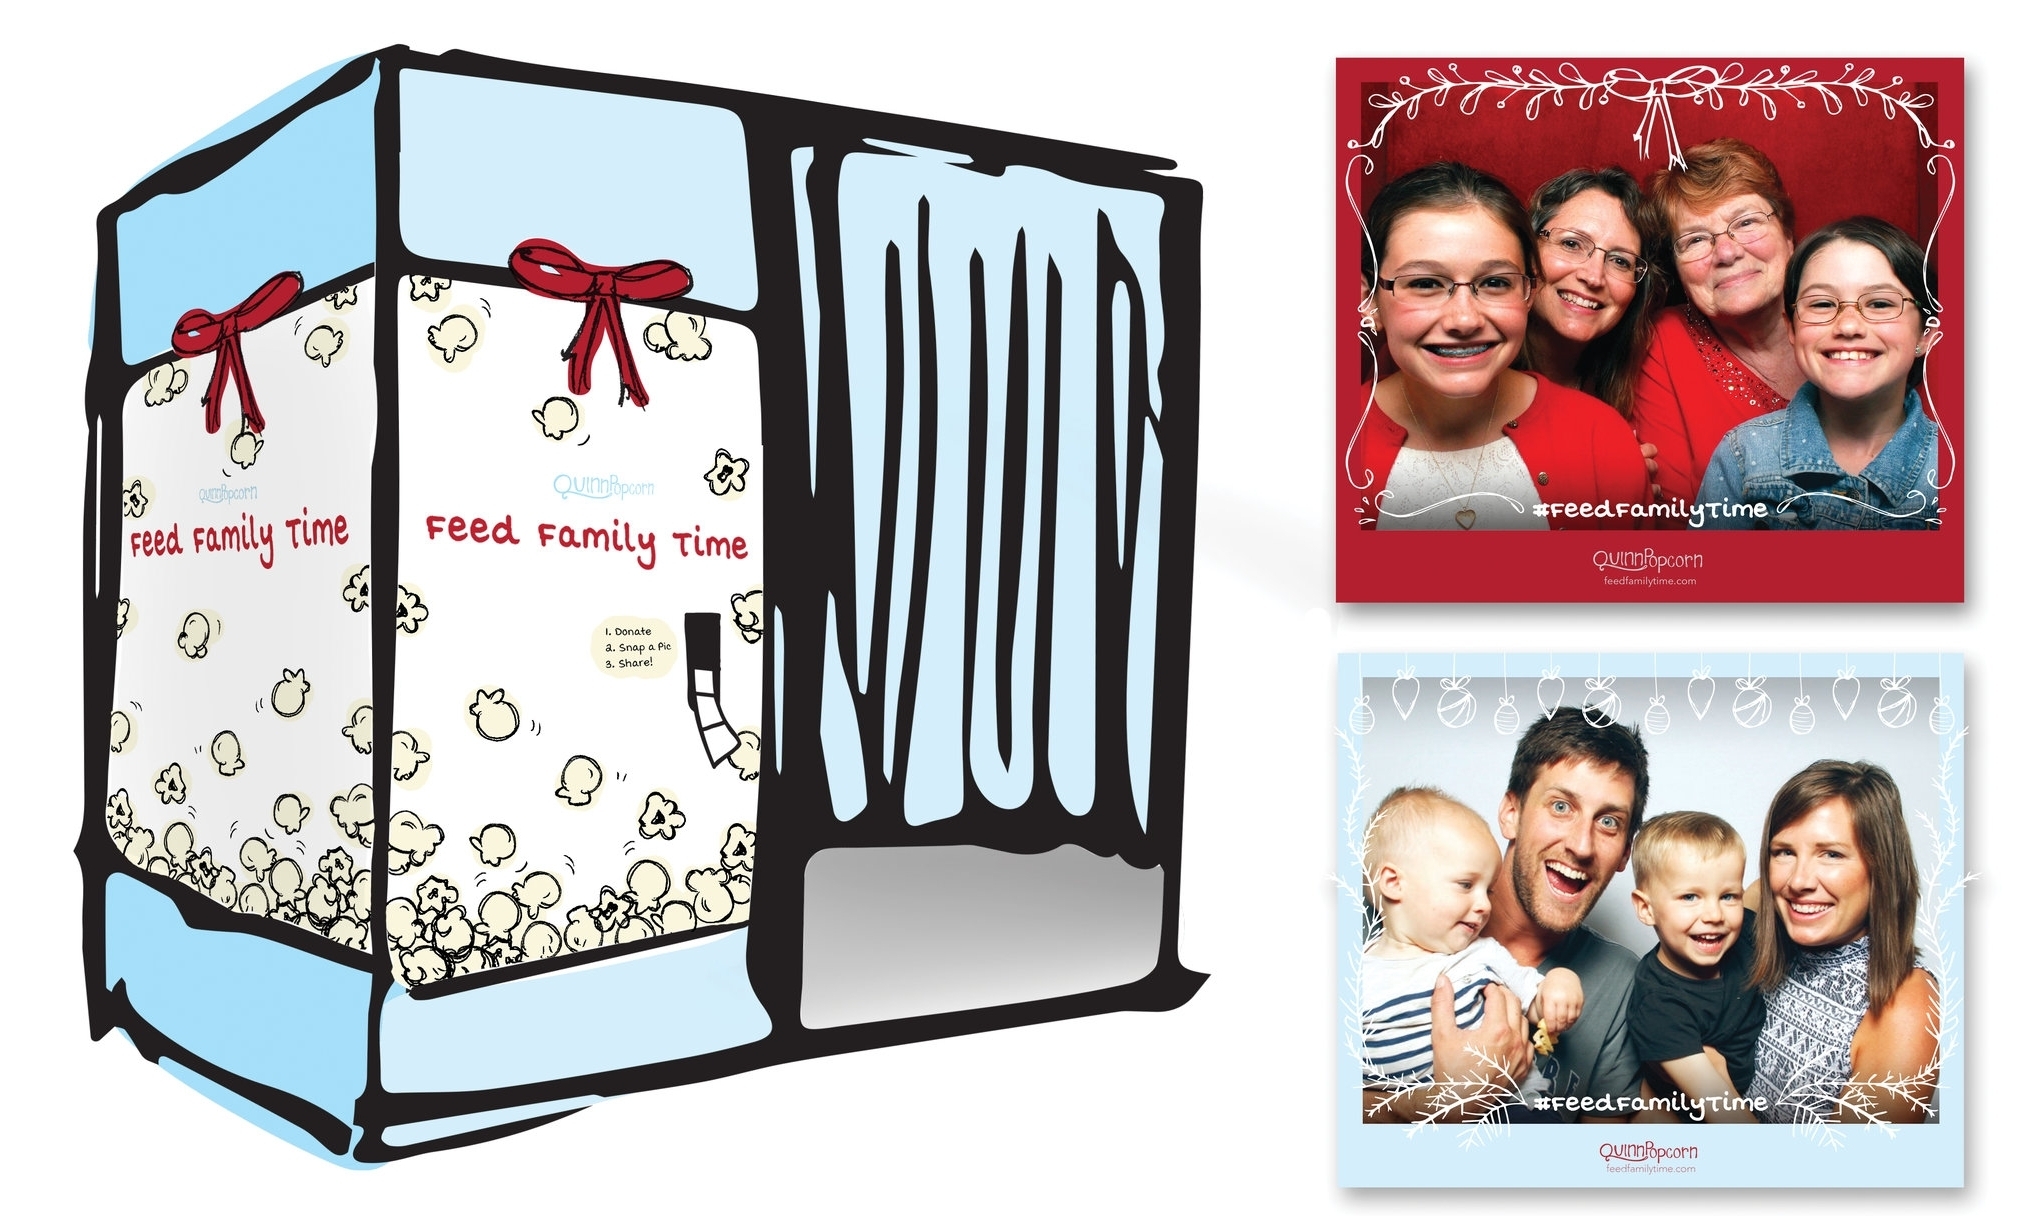   Holiday Photo Booth : Enter a booth outside your local grocery store, open the donation slot by scanning the book or movie’s barcode, snap a pic, select a frame and filter, and share. Can be redesigned for each season after the winter challenge end